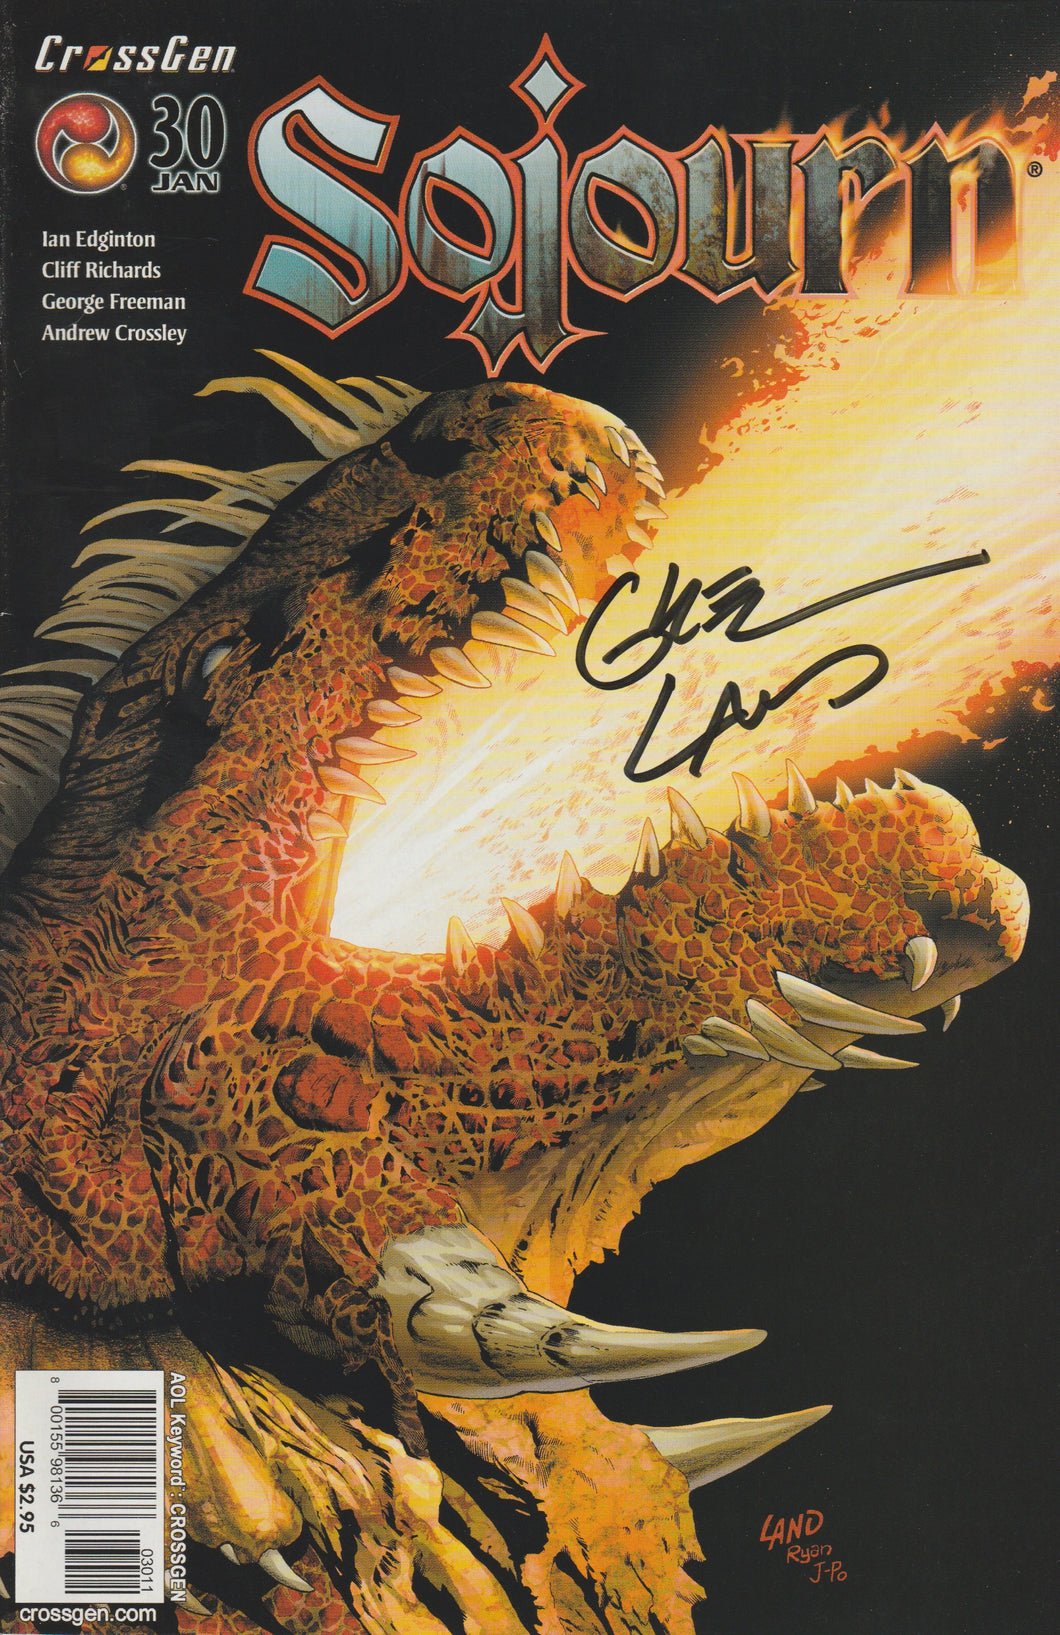 Sojourn #30 signed by Greg Land